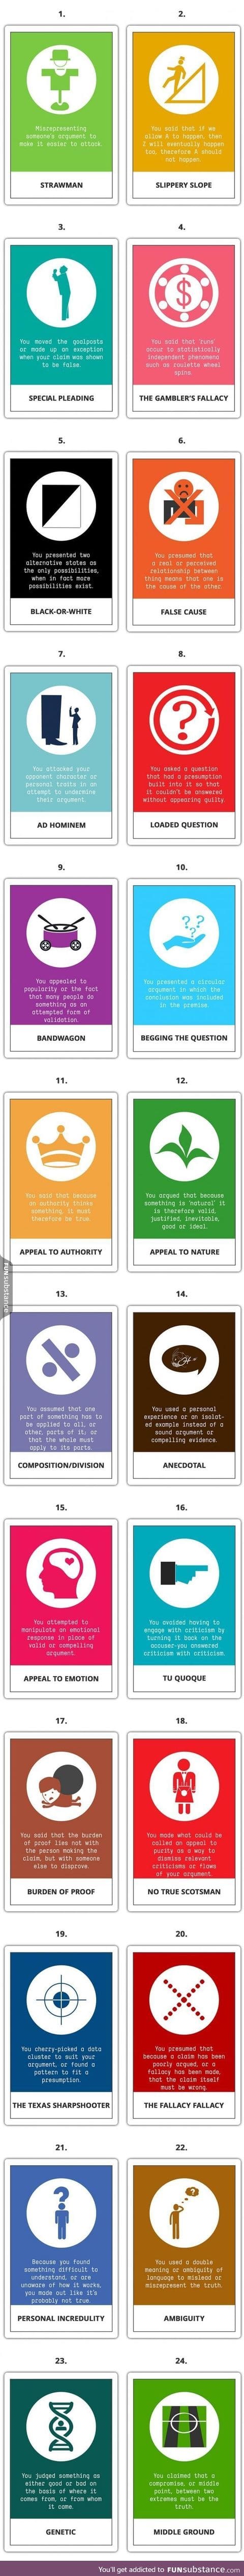 Sumarry of common logical fallacies